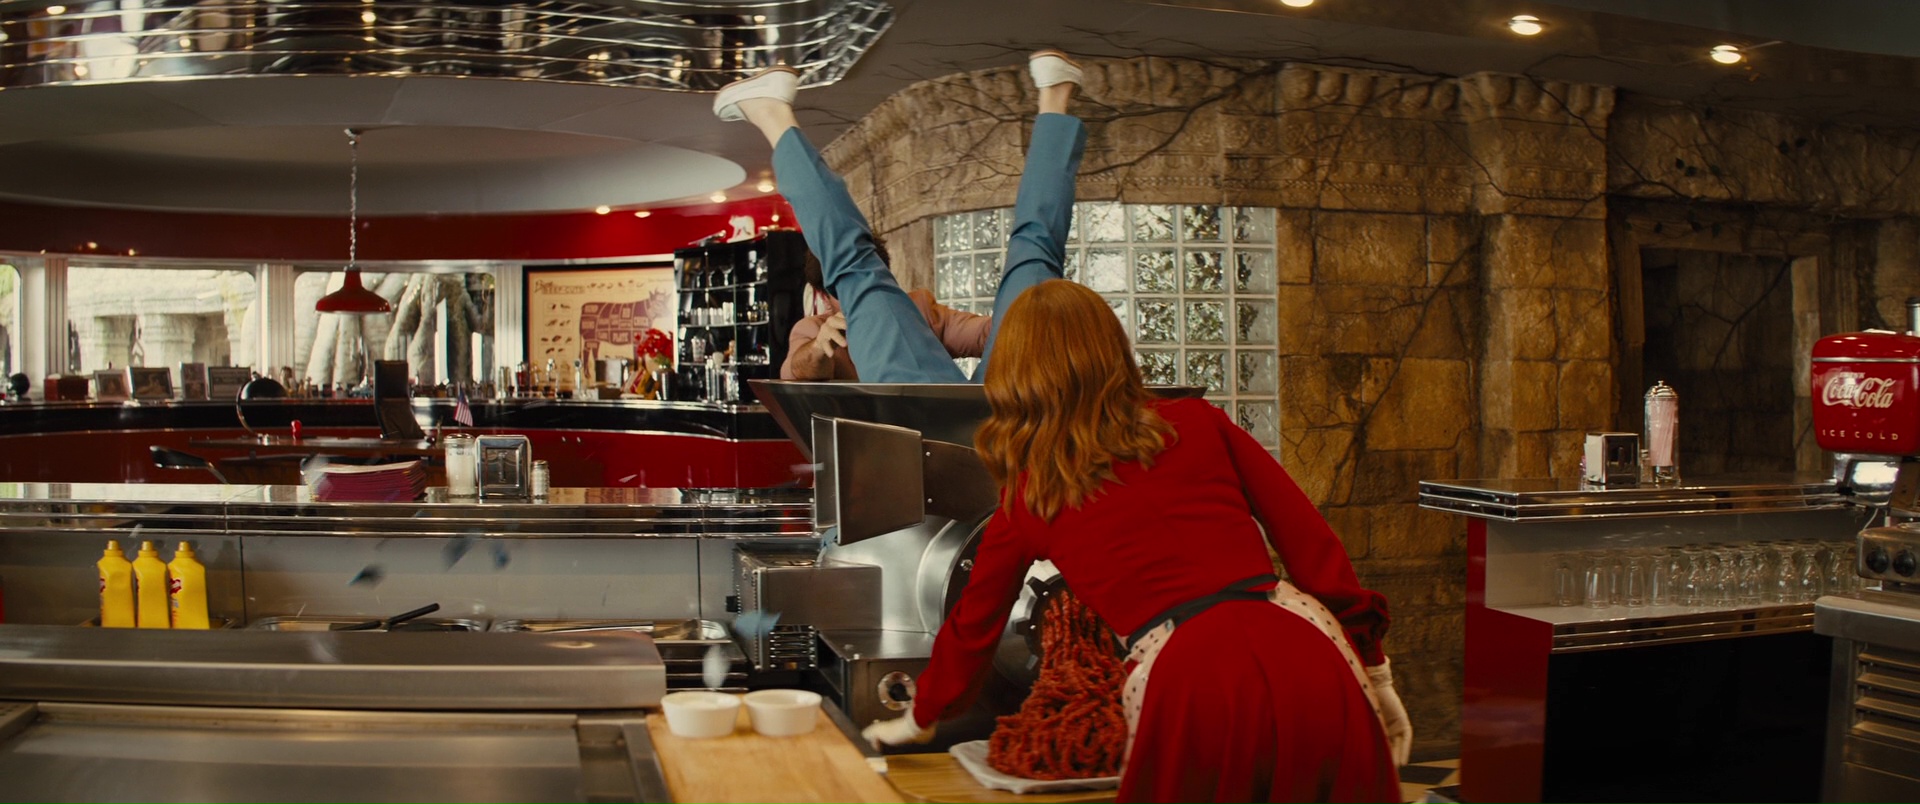 Coca-Cola and Julianne Moore in Kingsman 2: The Golden Circle (2017) Movie1920 x 804